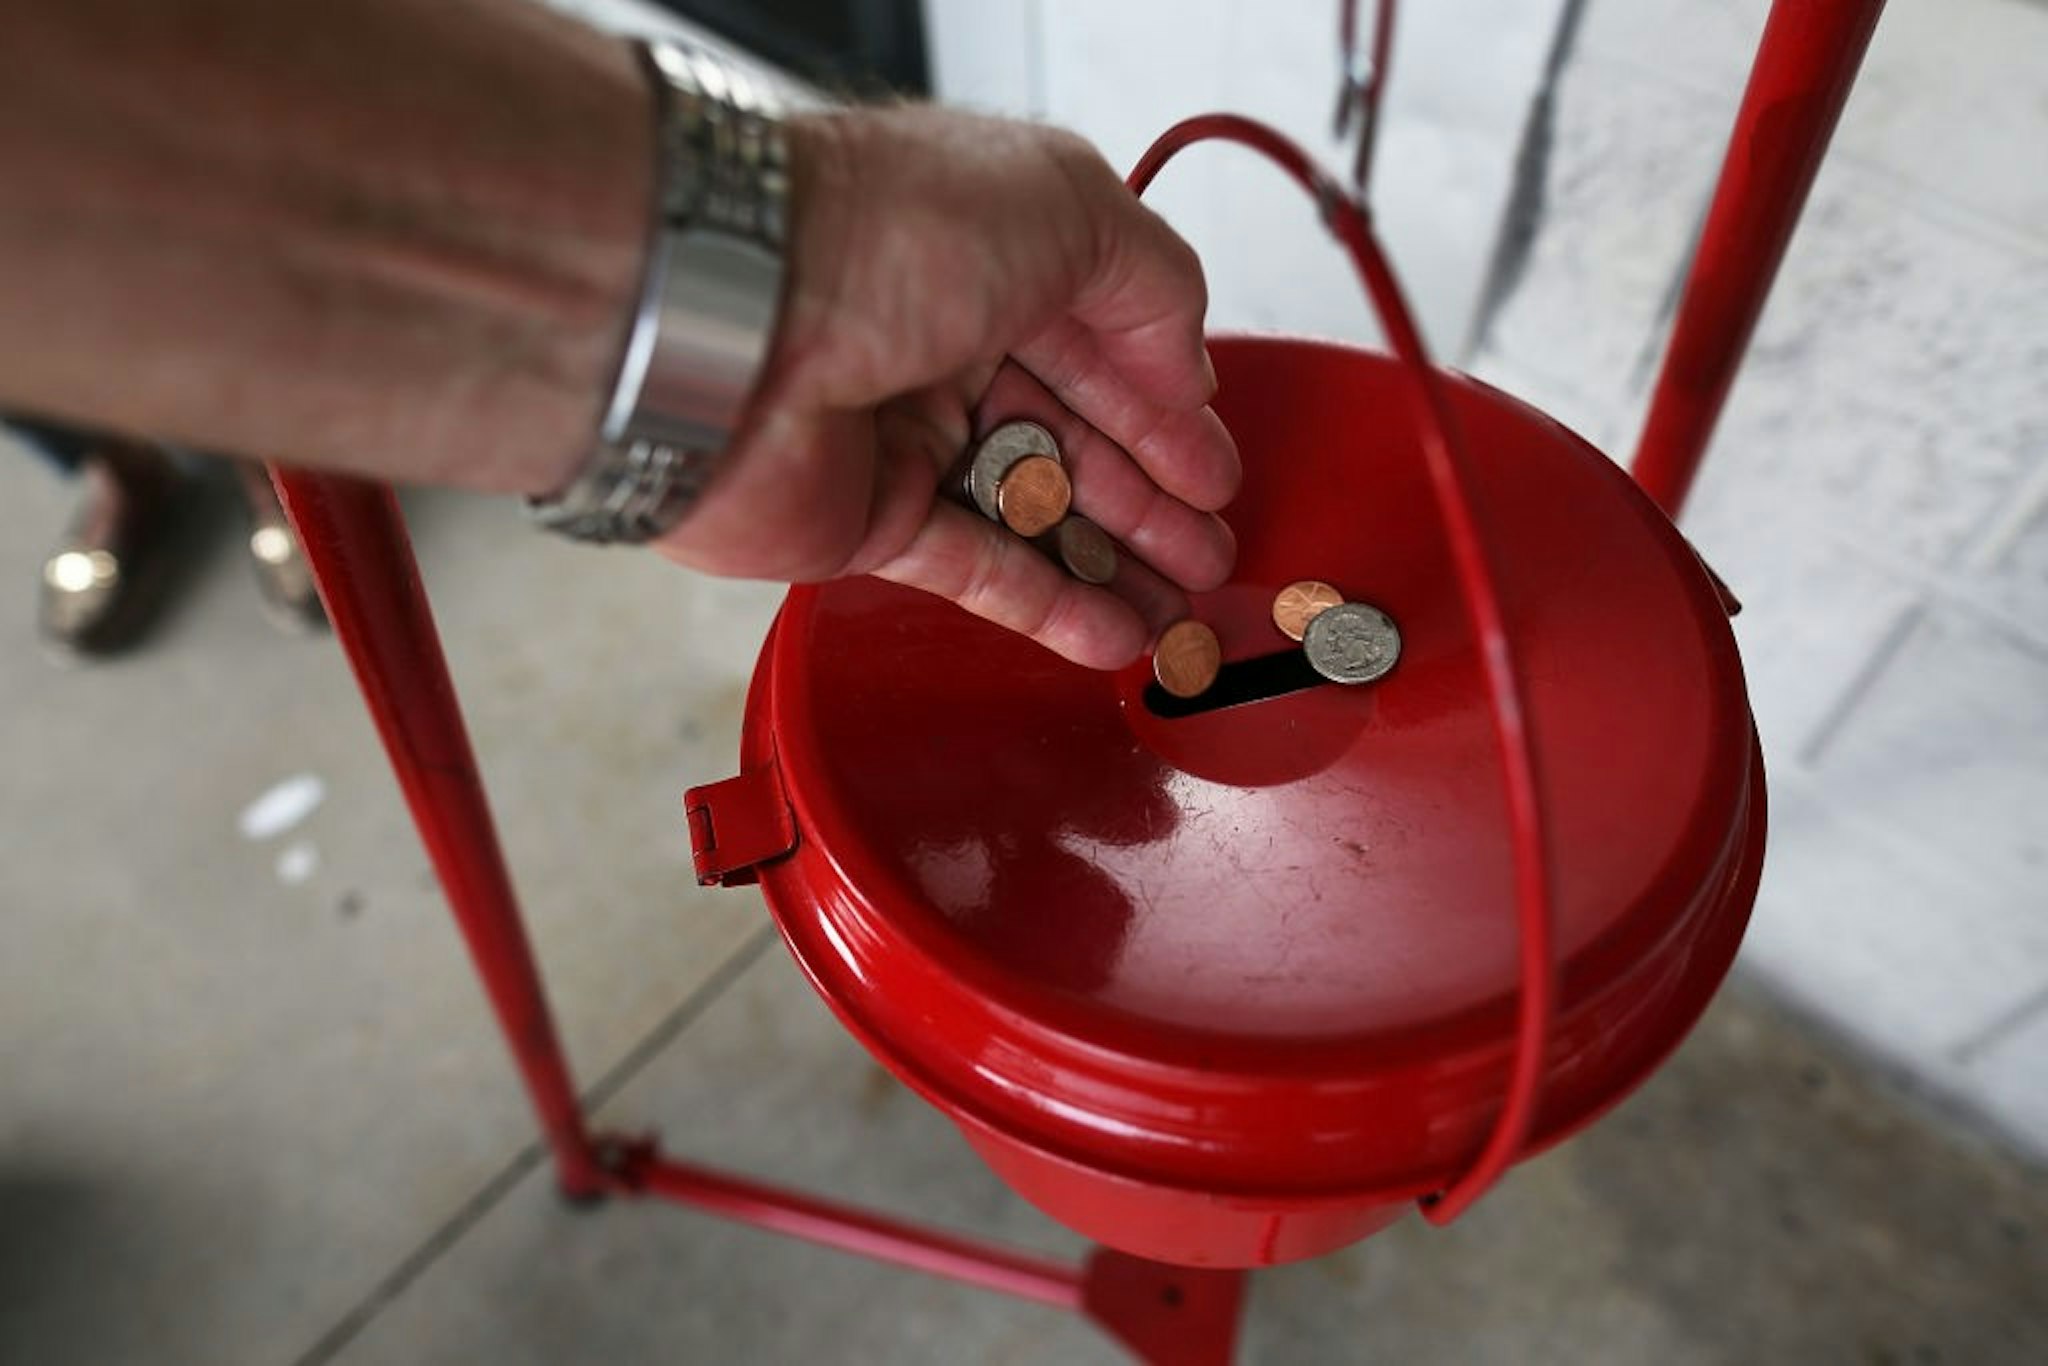 HALLANDALE, FL - NOVEMBER 28: A donation is made into a Salvation Army red kettle on Giving Tuesday on November 28, 2017 in Hallandale, Florida. Giving Tuesday is a single day following the heavy Thanksgiving shopping period specifically focused on charity. (Photo by